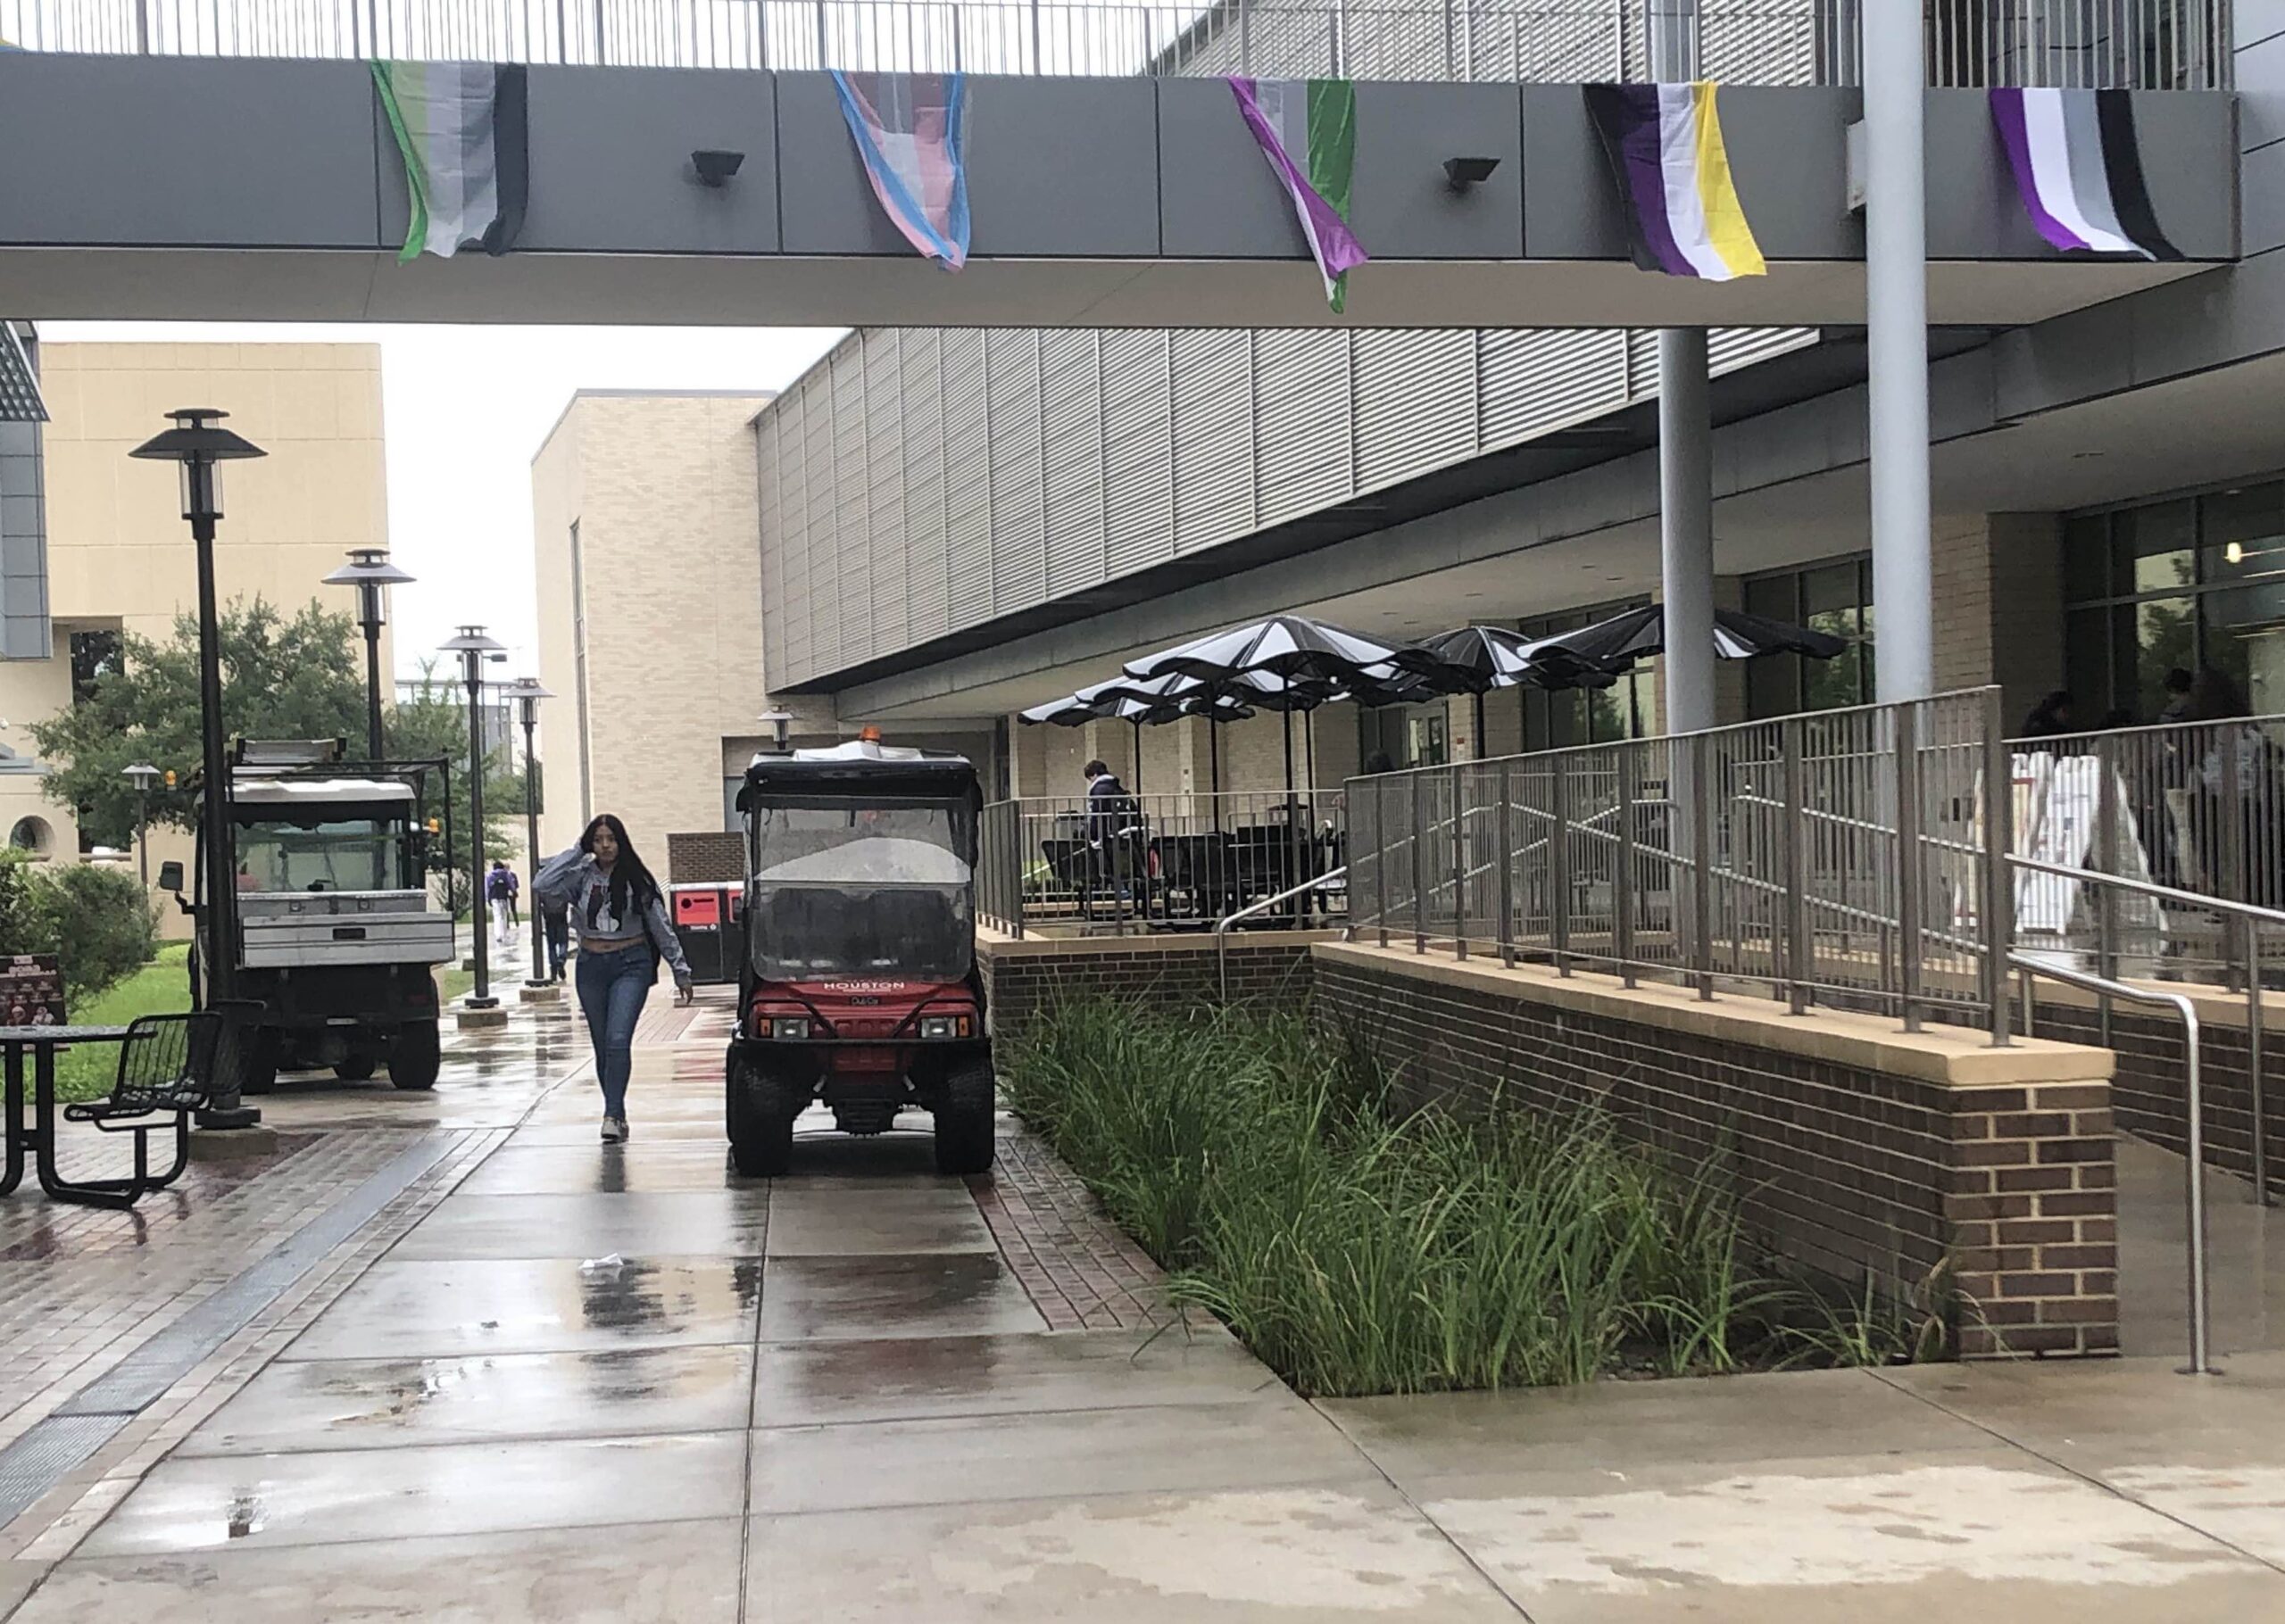 Various LGBTQ+ Pride flags hang from an elevated walkway above the rain-soaked campus of the University of Houston. A few students walk outside while faculty or staff drives past in covered golf carts.